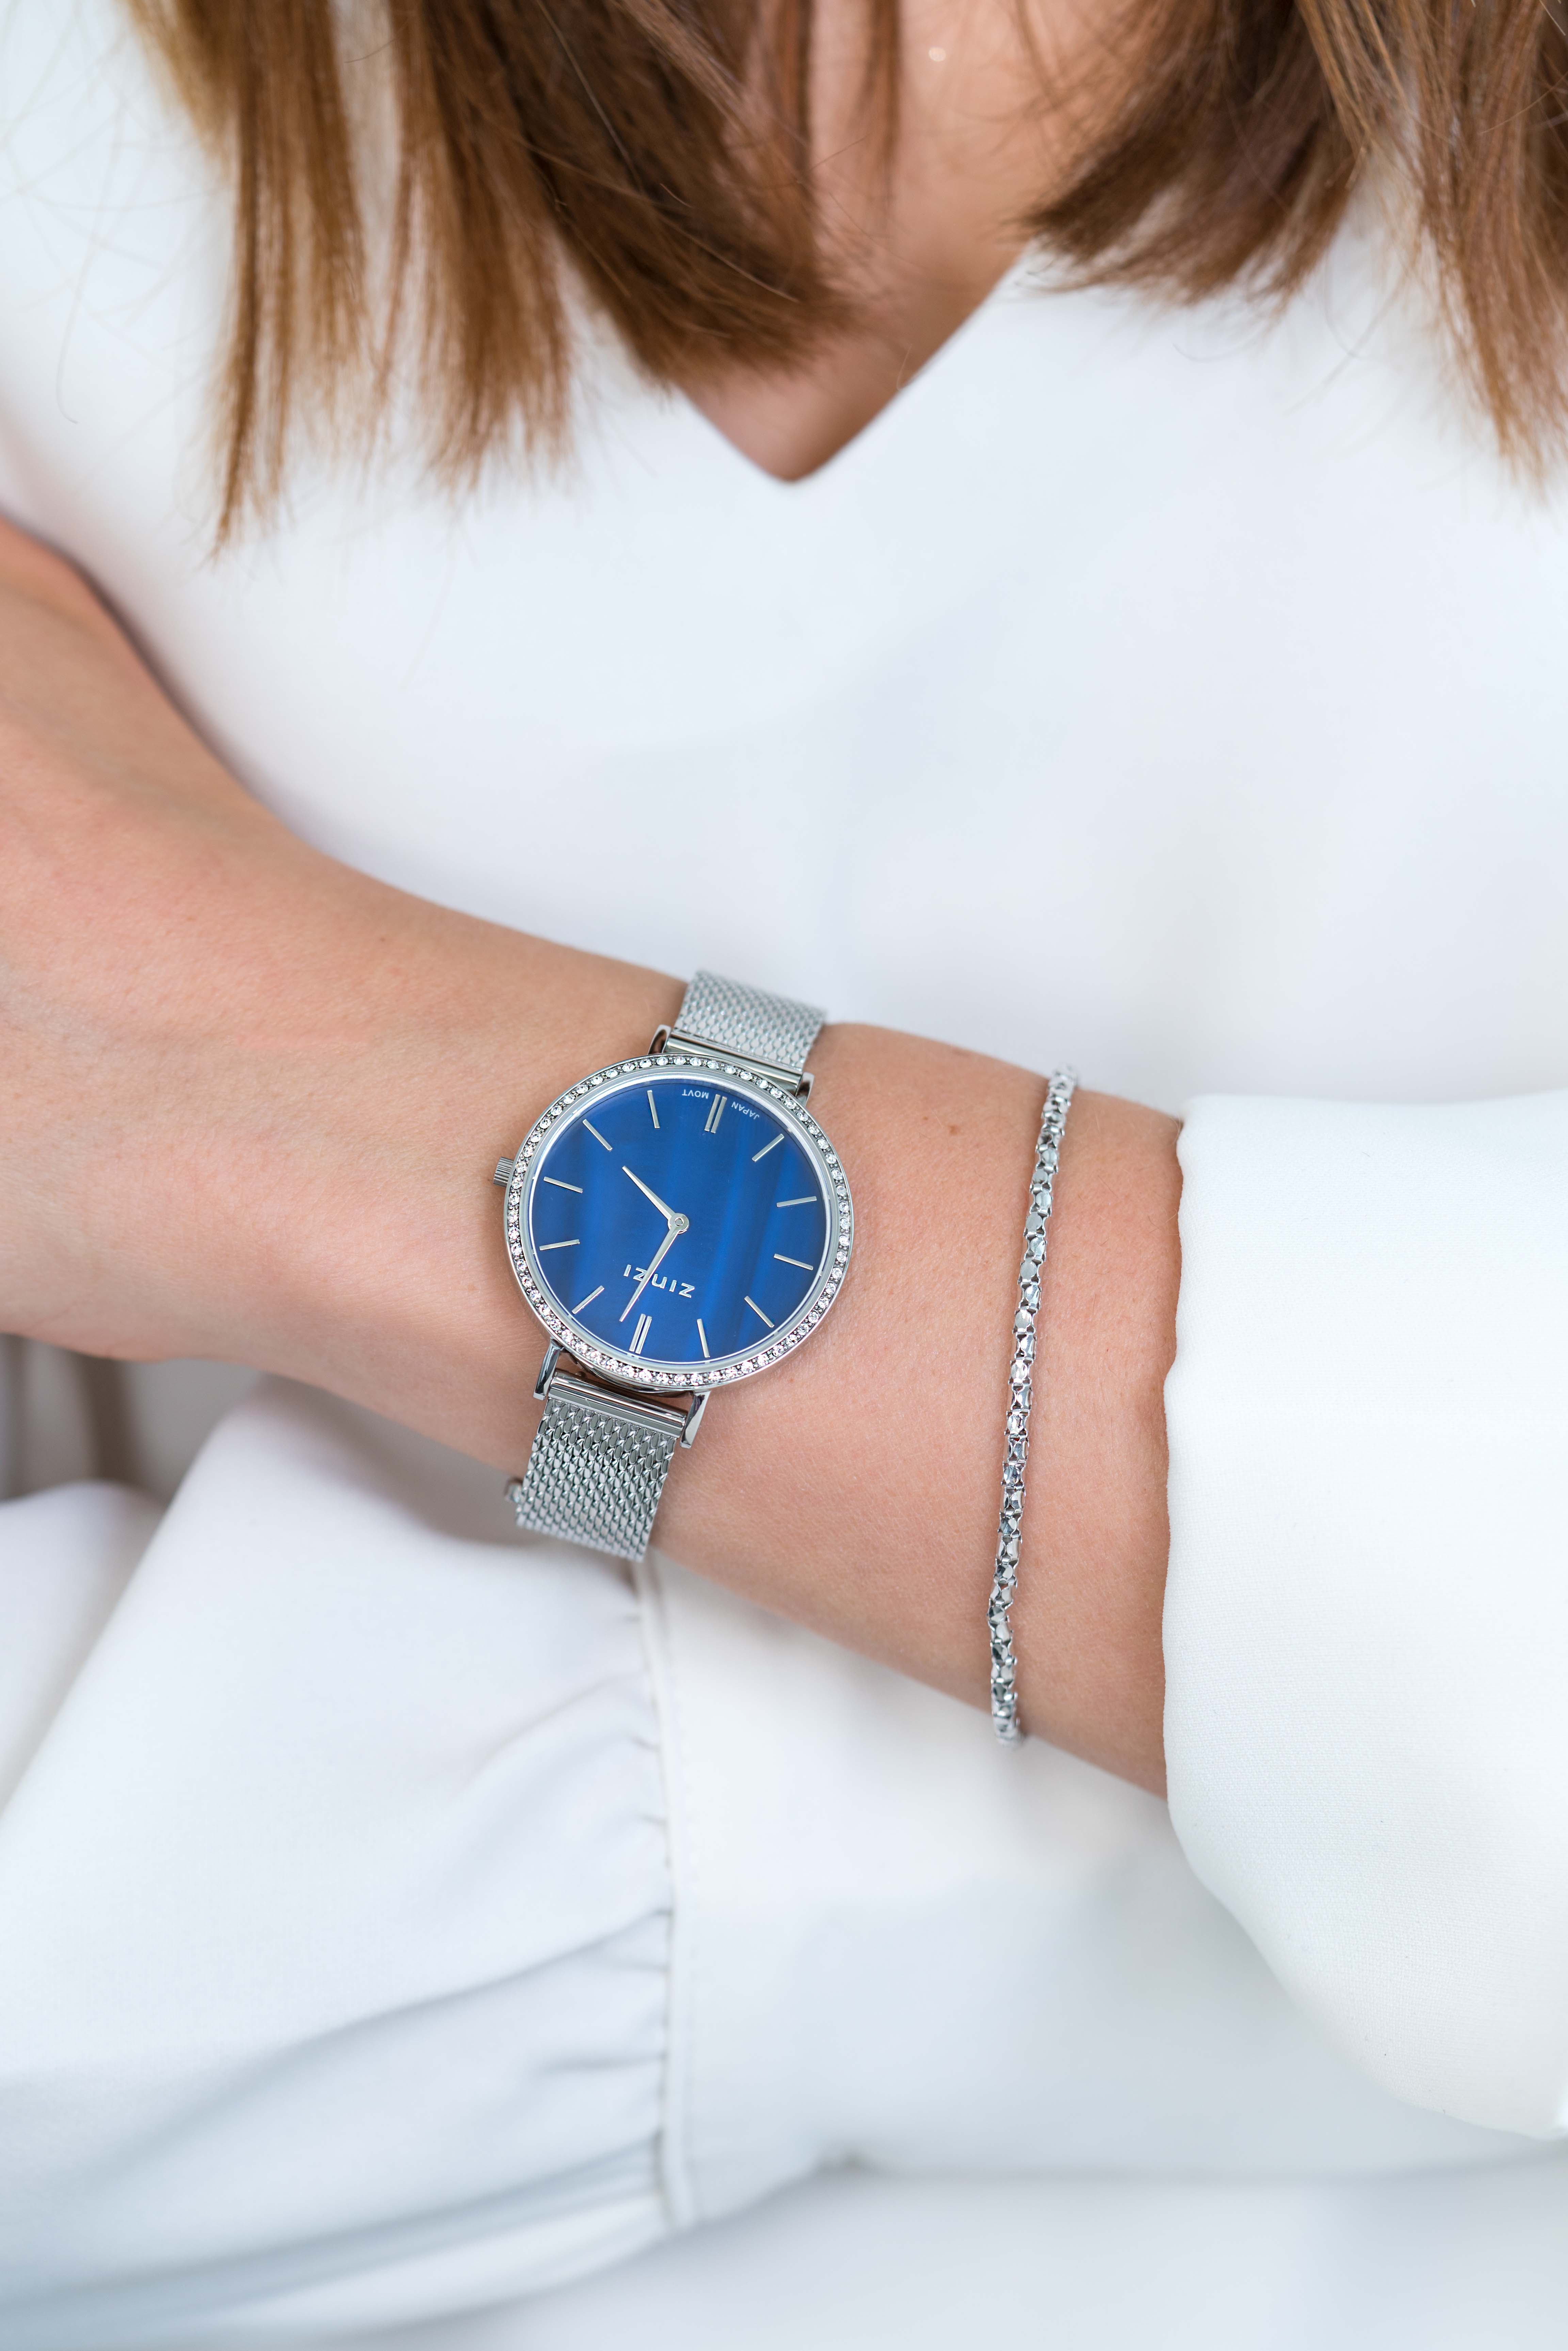 ZINZI Watch GRACE 34mm Dark Blue Mother-of-Pearl Dial Set with White Crystals Stainless Steel Case and Strap ZIW1346